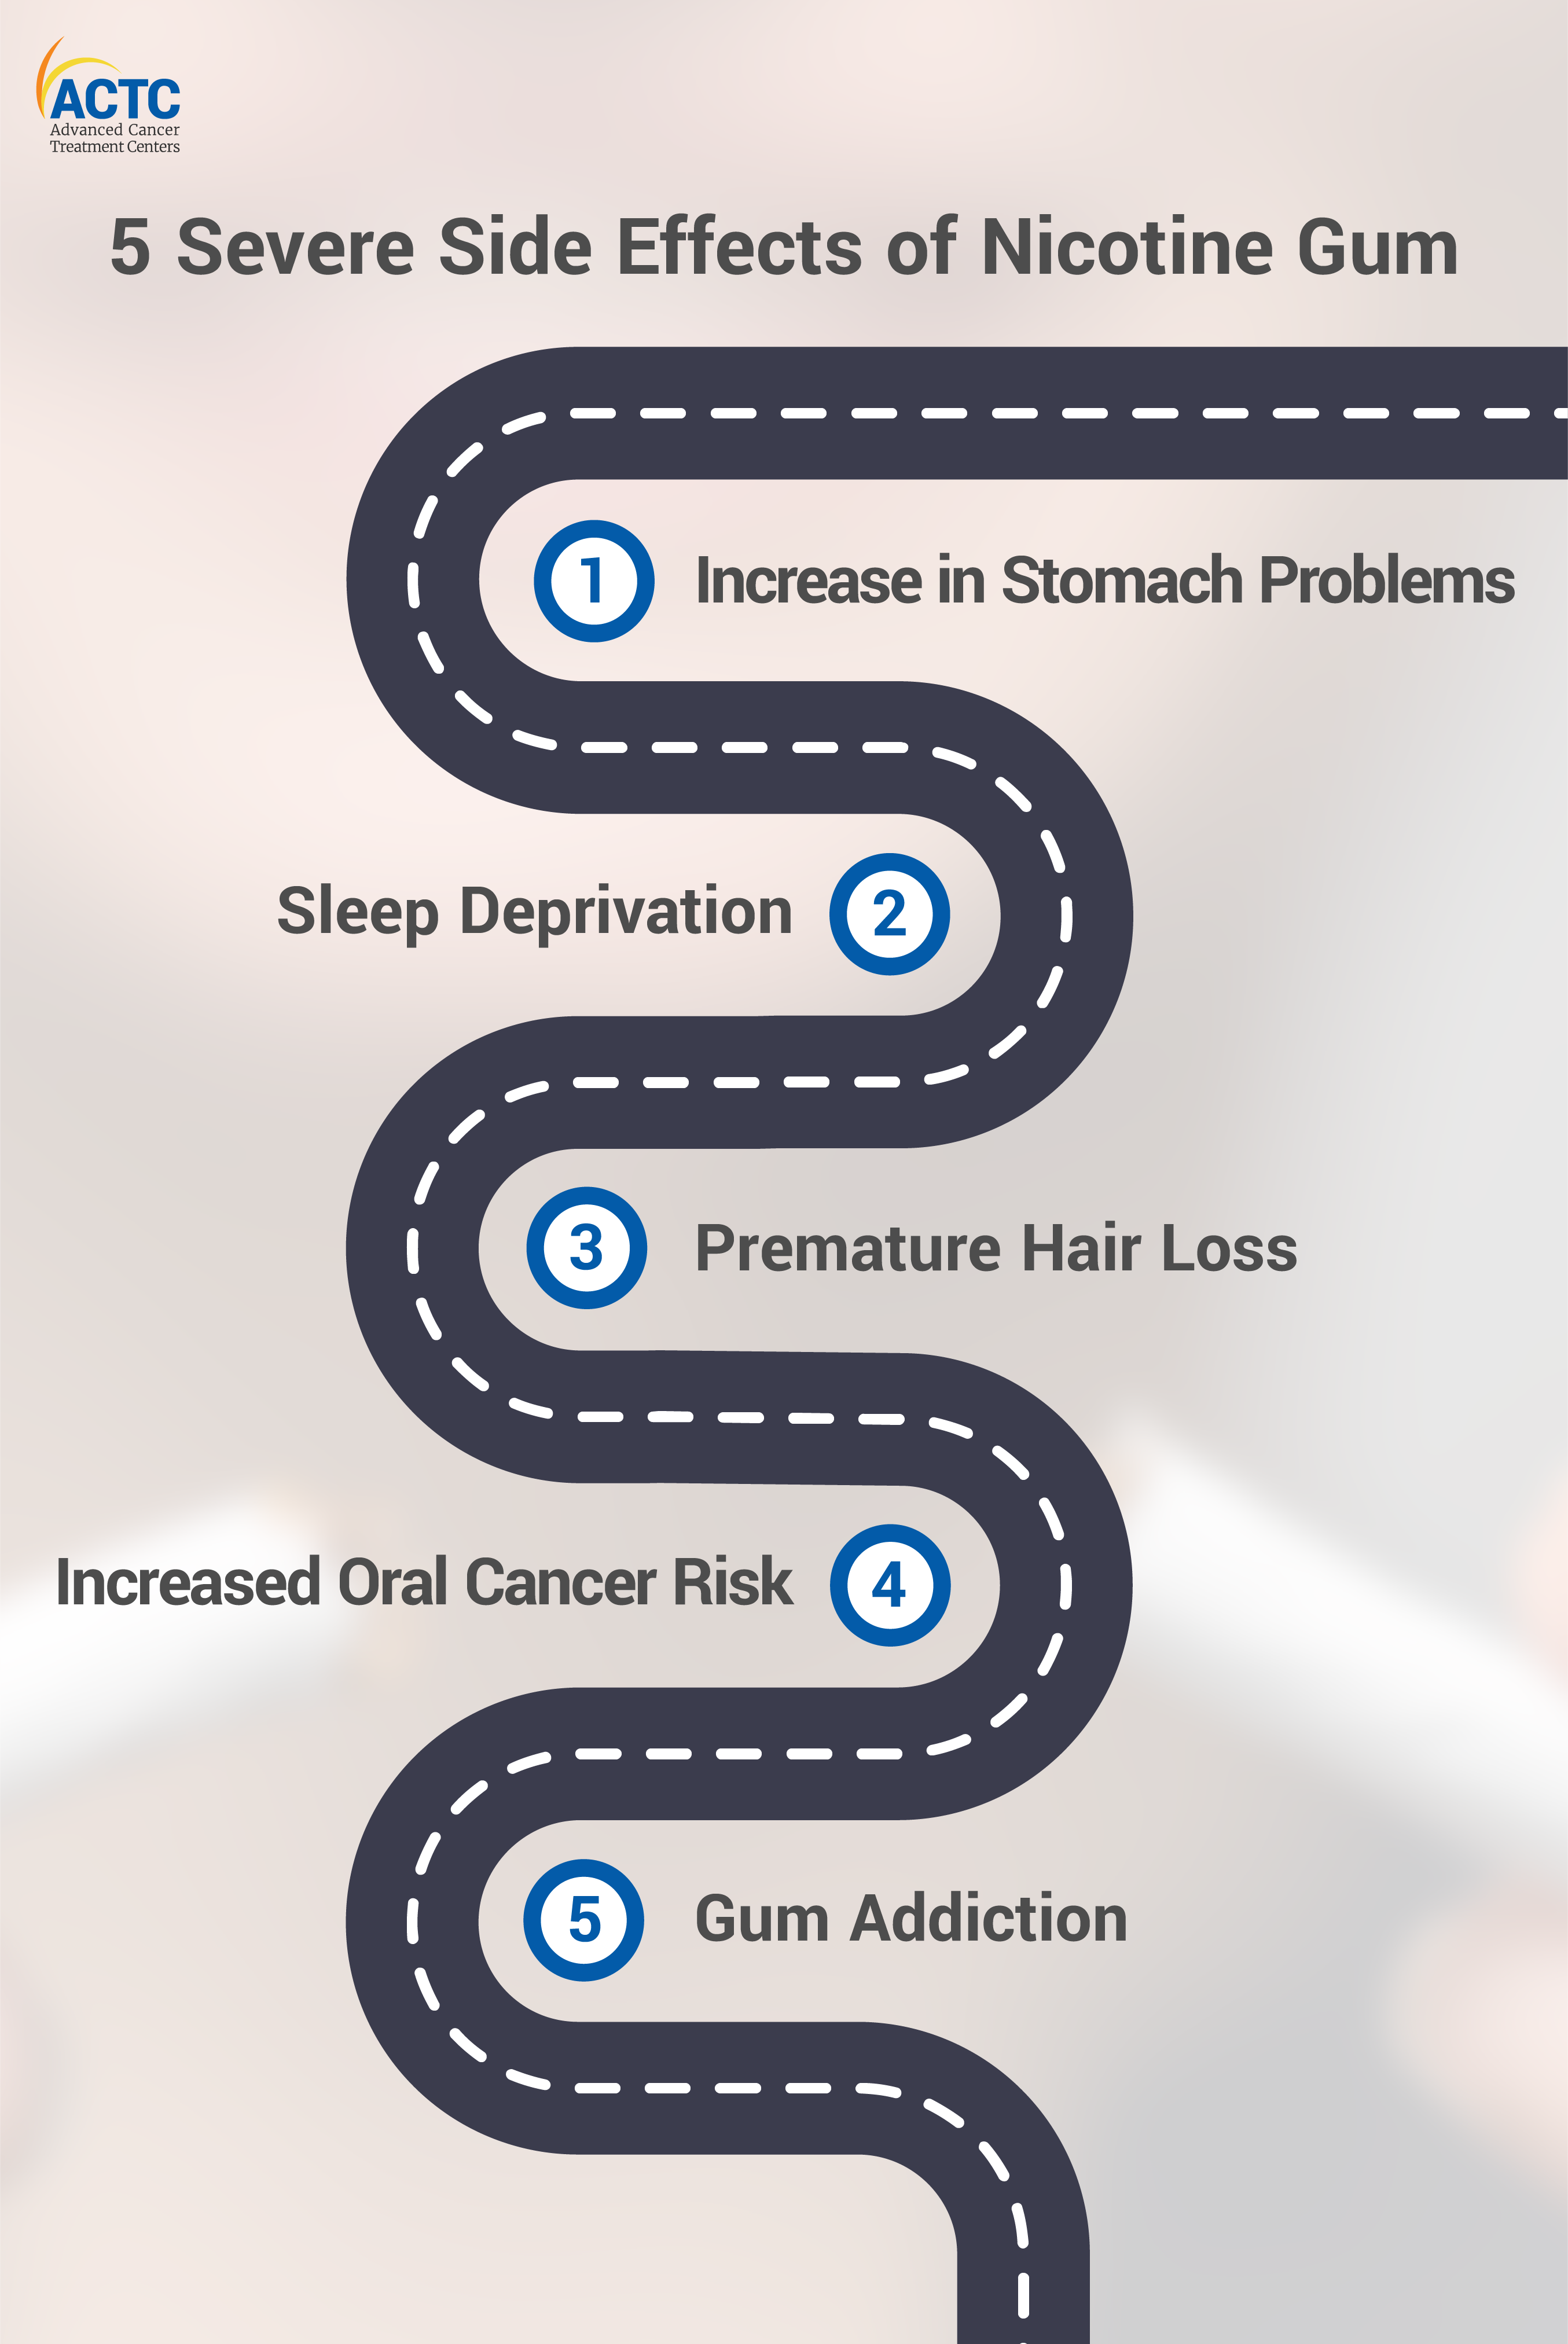 5 Severe Side Effects of Nicotine Gum